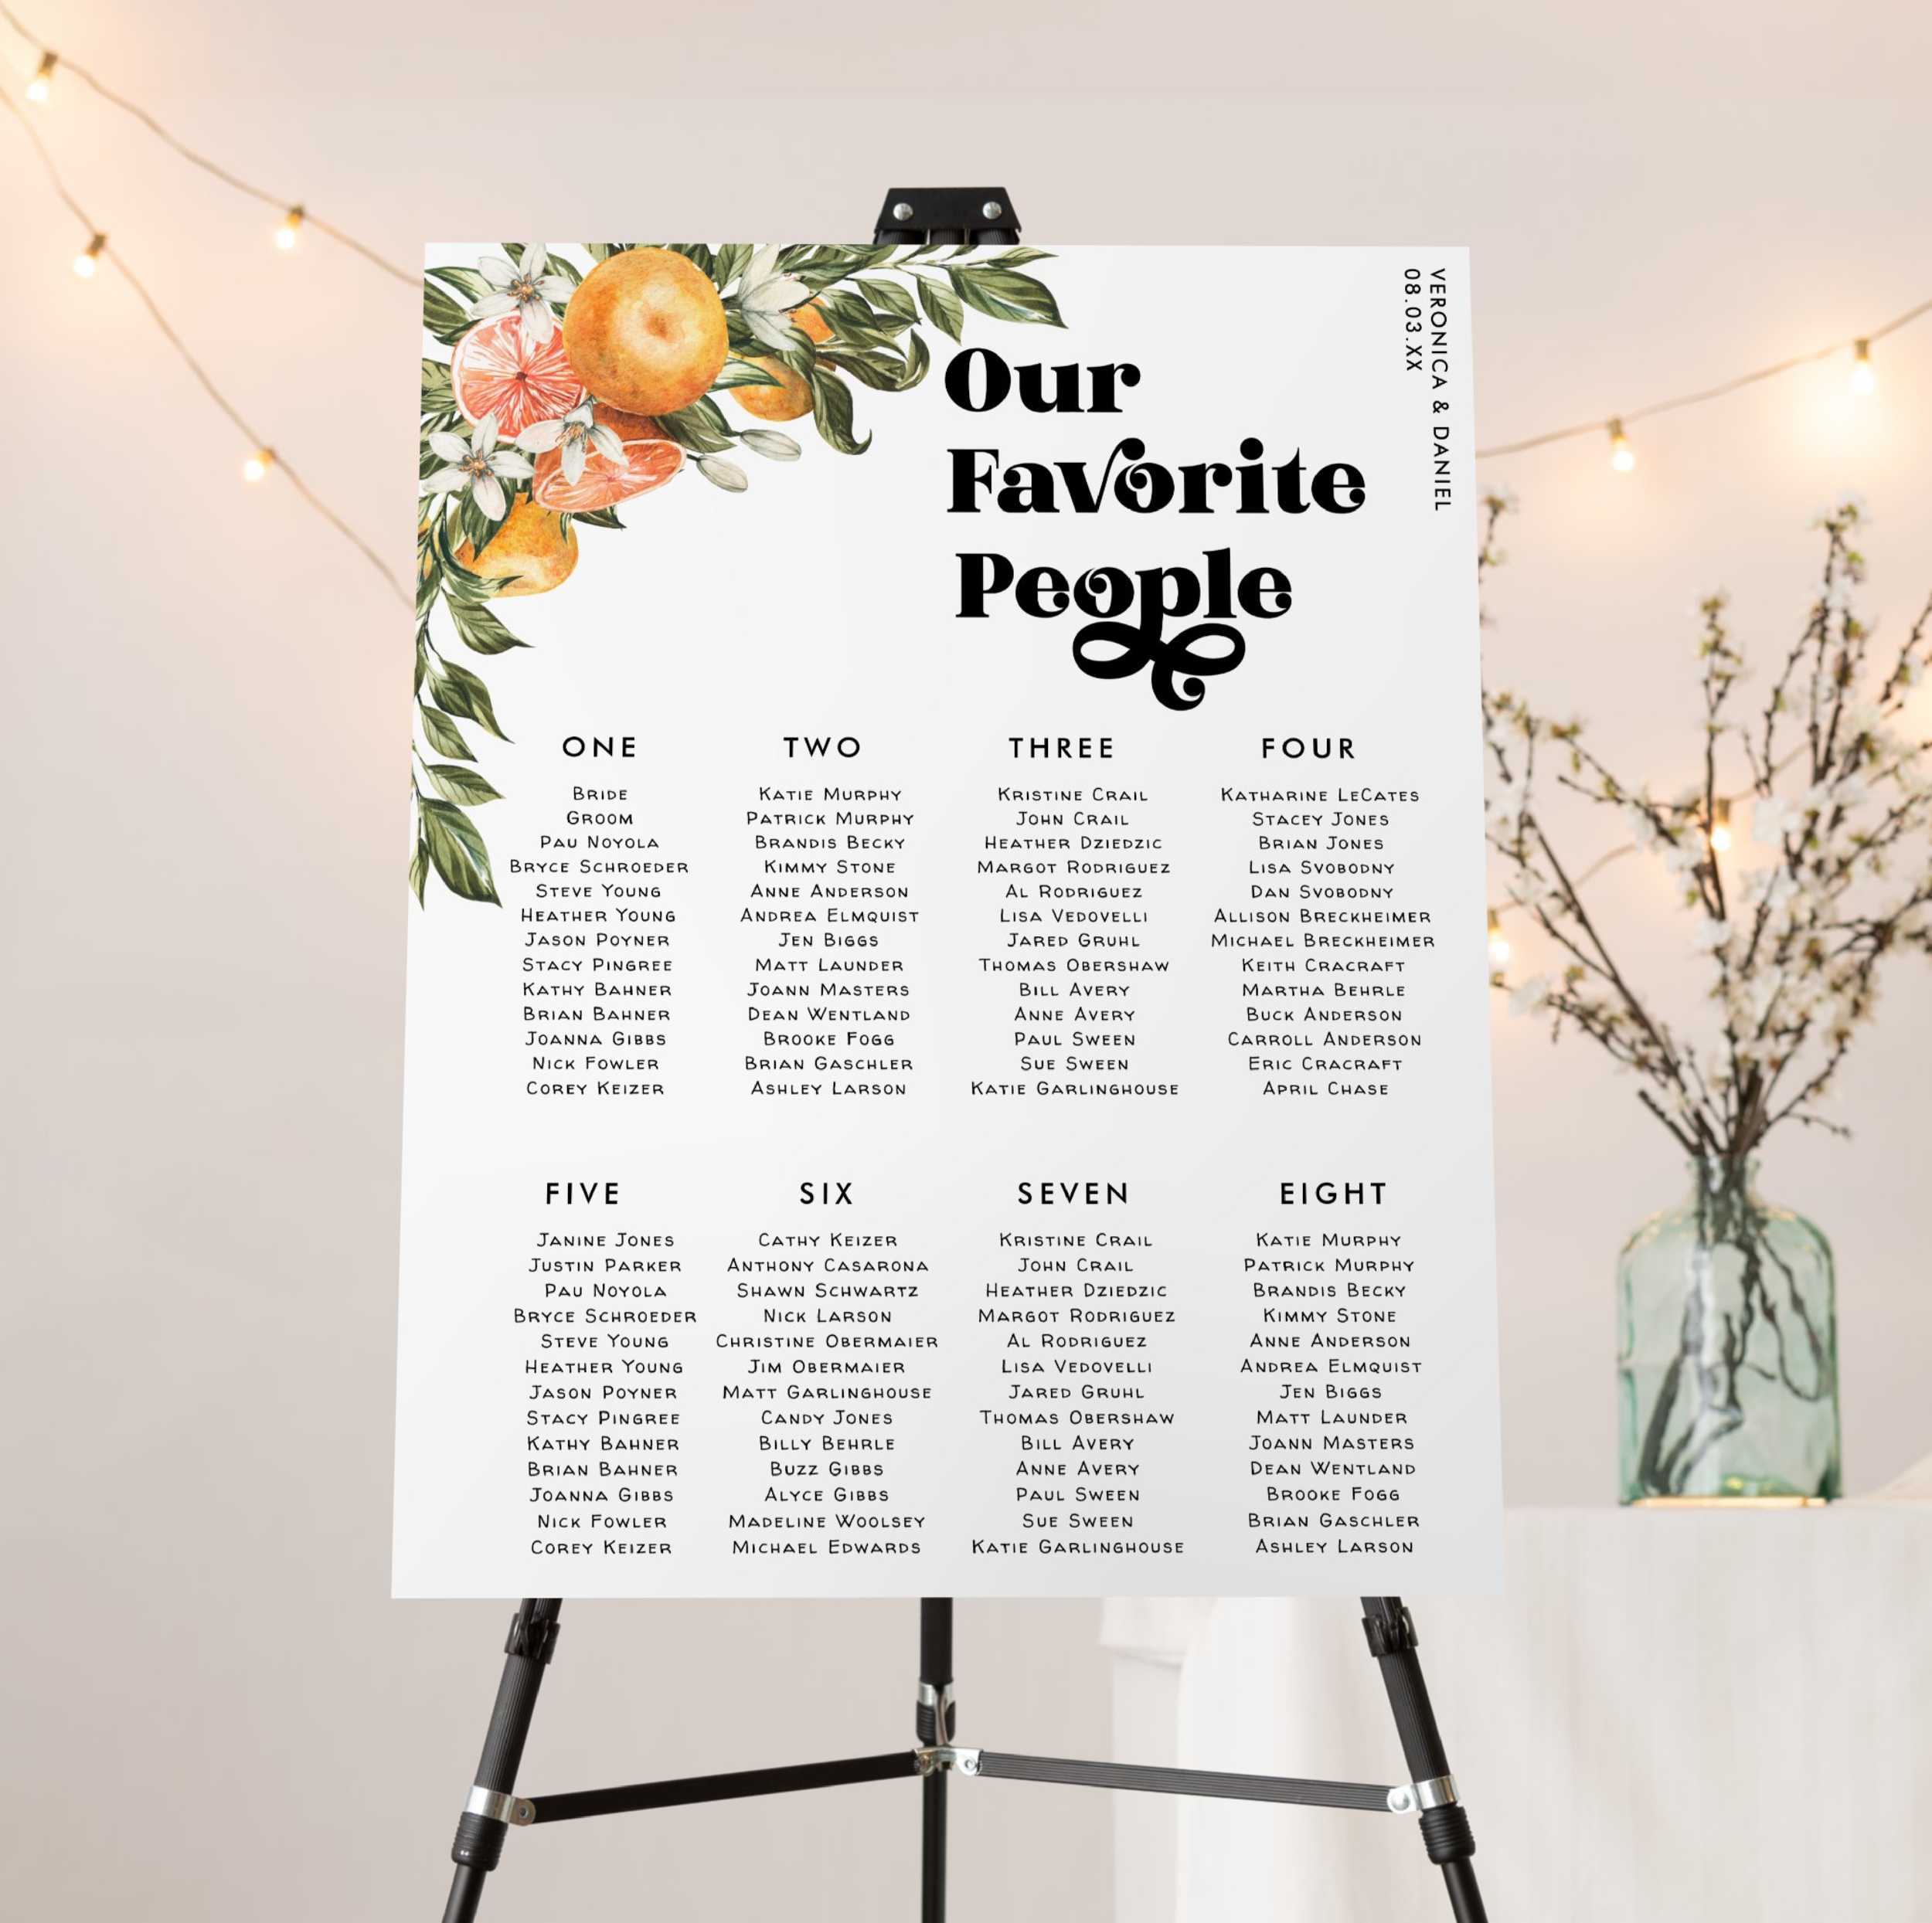 citrus_orchard_wedding_table_seating_foam_board-r9c01e5f9ac3145a0afe0cf2873357e53_uqpvl_1024.png